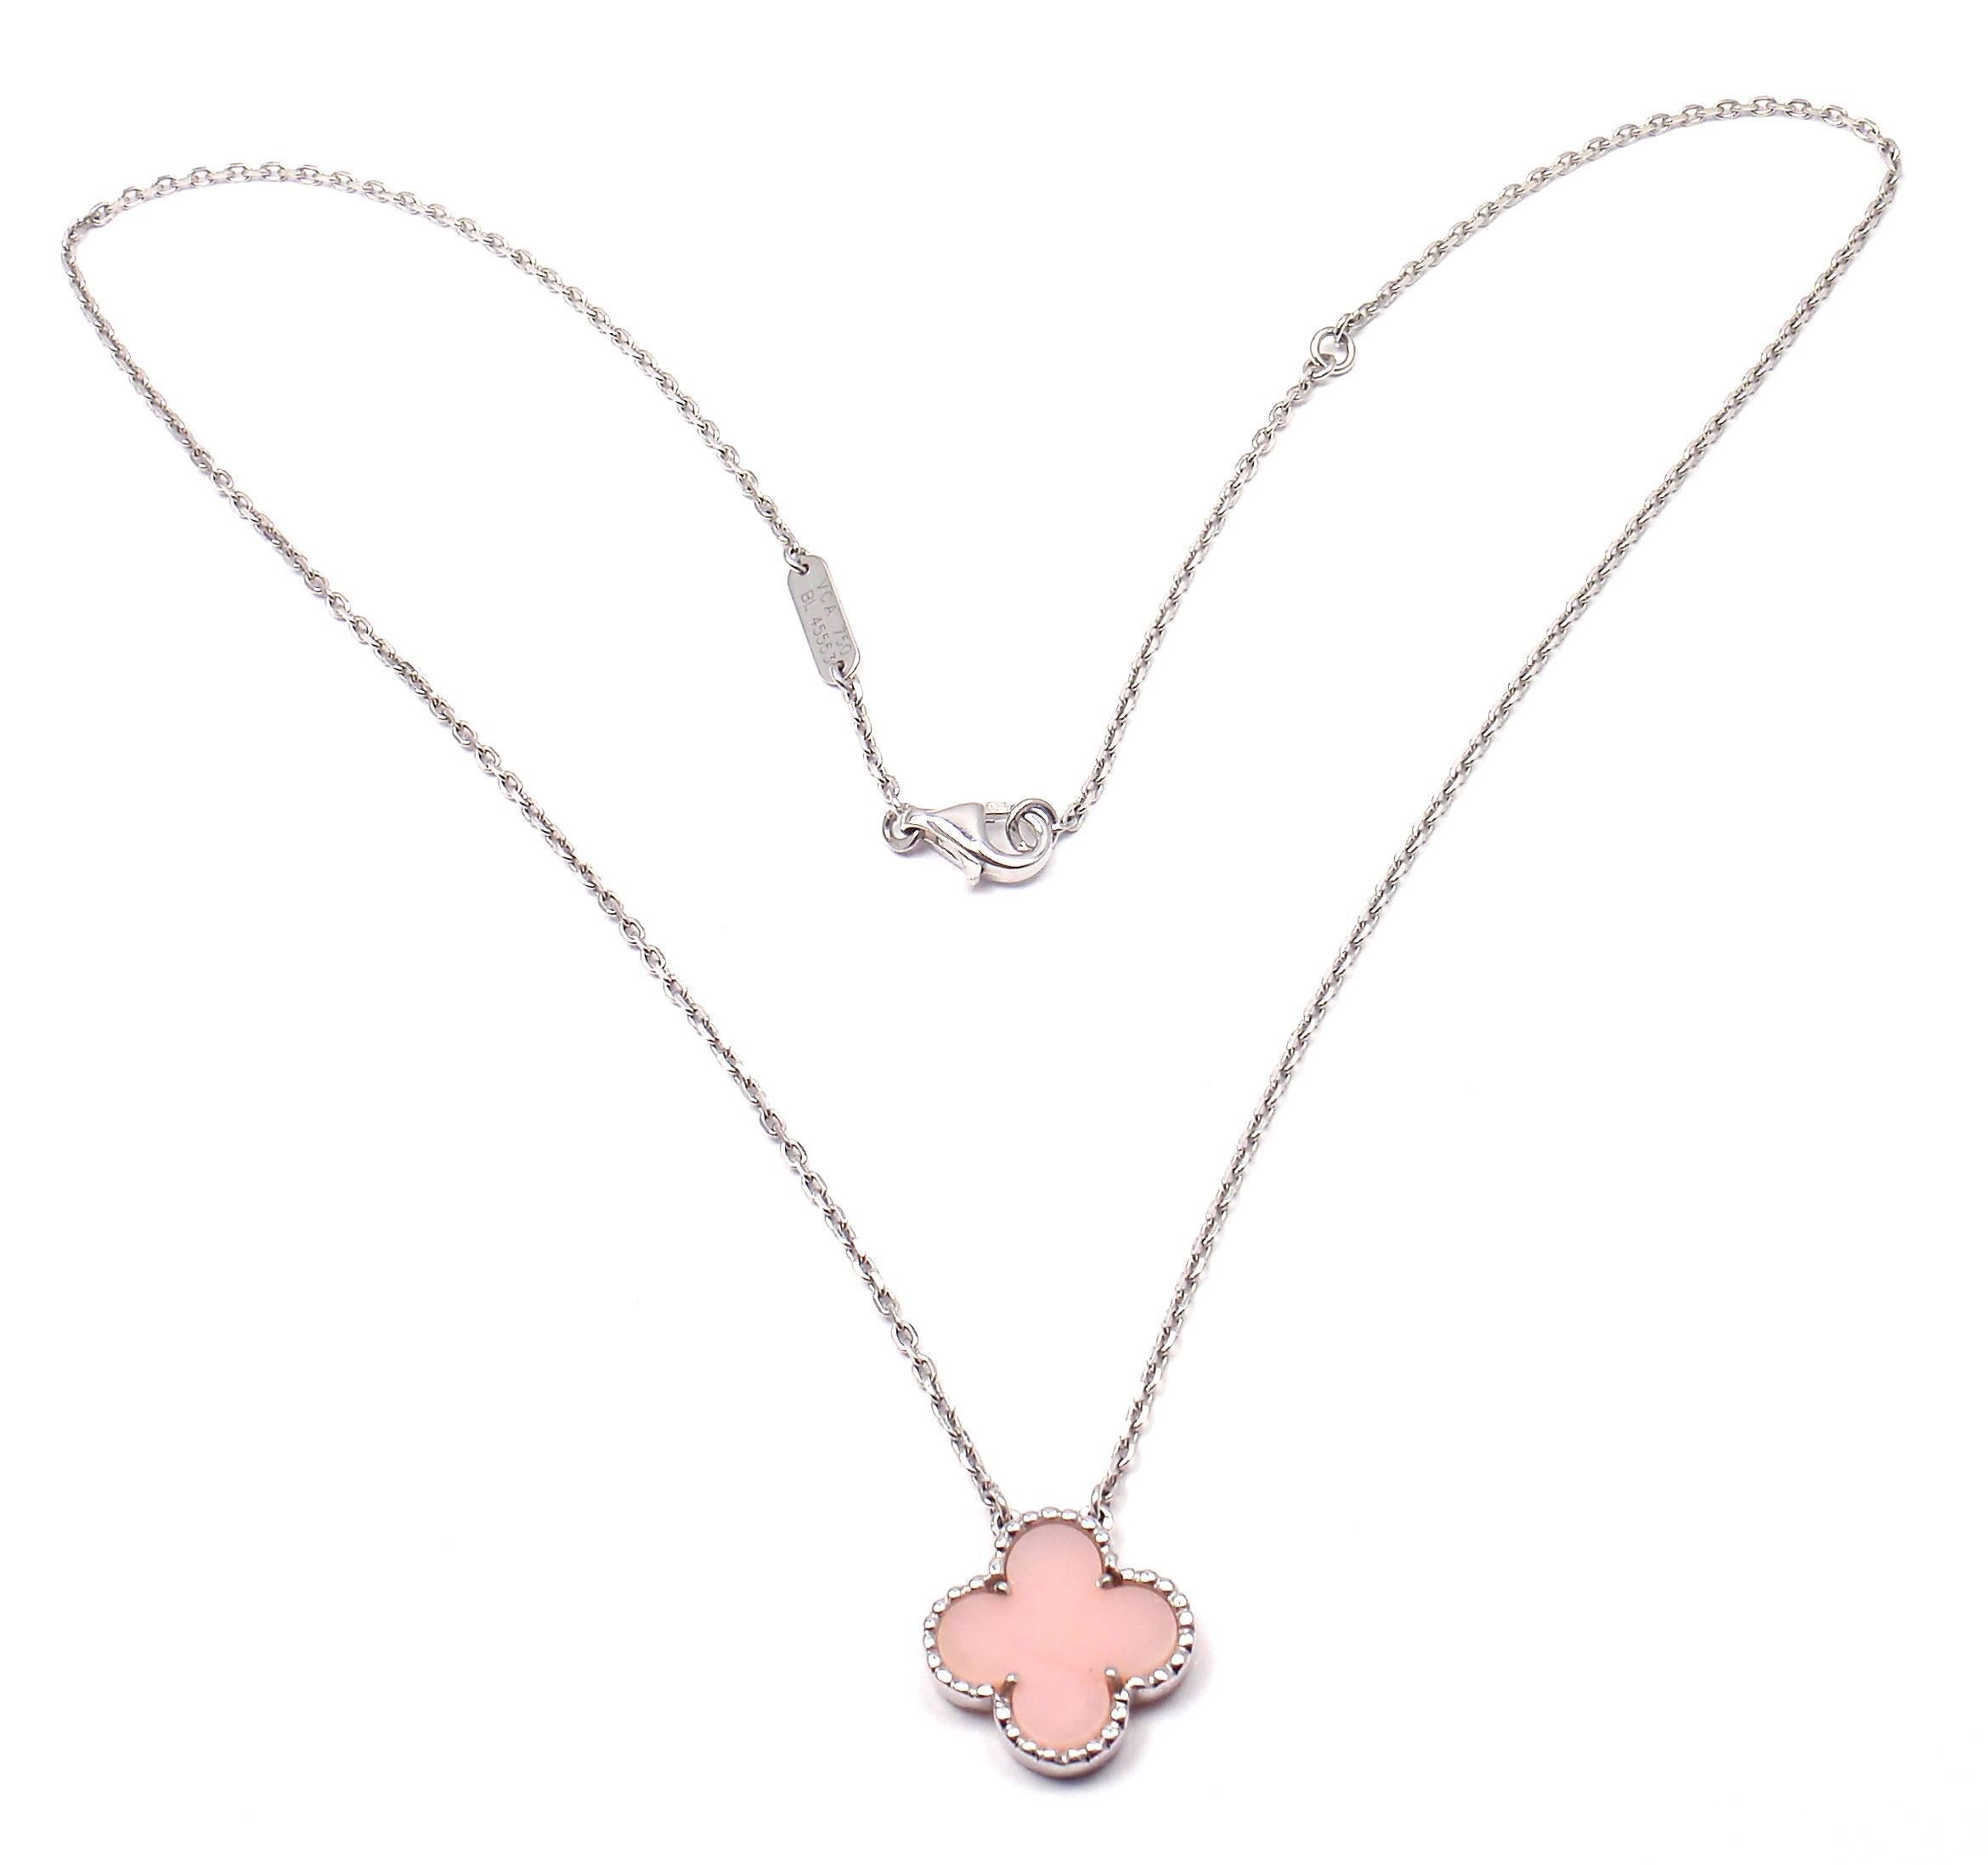 18k White Gold Vintage Alhambra Pink Opal Necklace By Van Cleef & Arpels.
With 1 mother of pearl stone: 15mm.
 
 Details:
 Length: 16.5